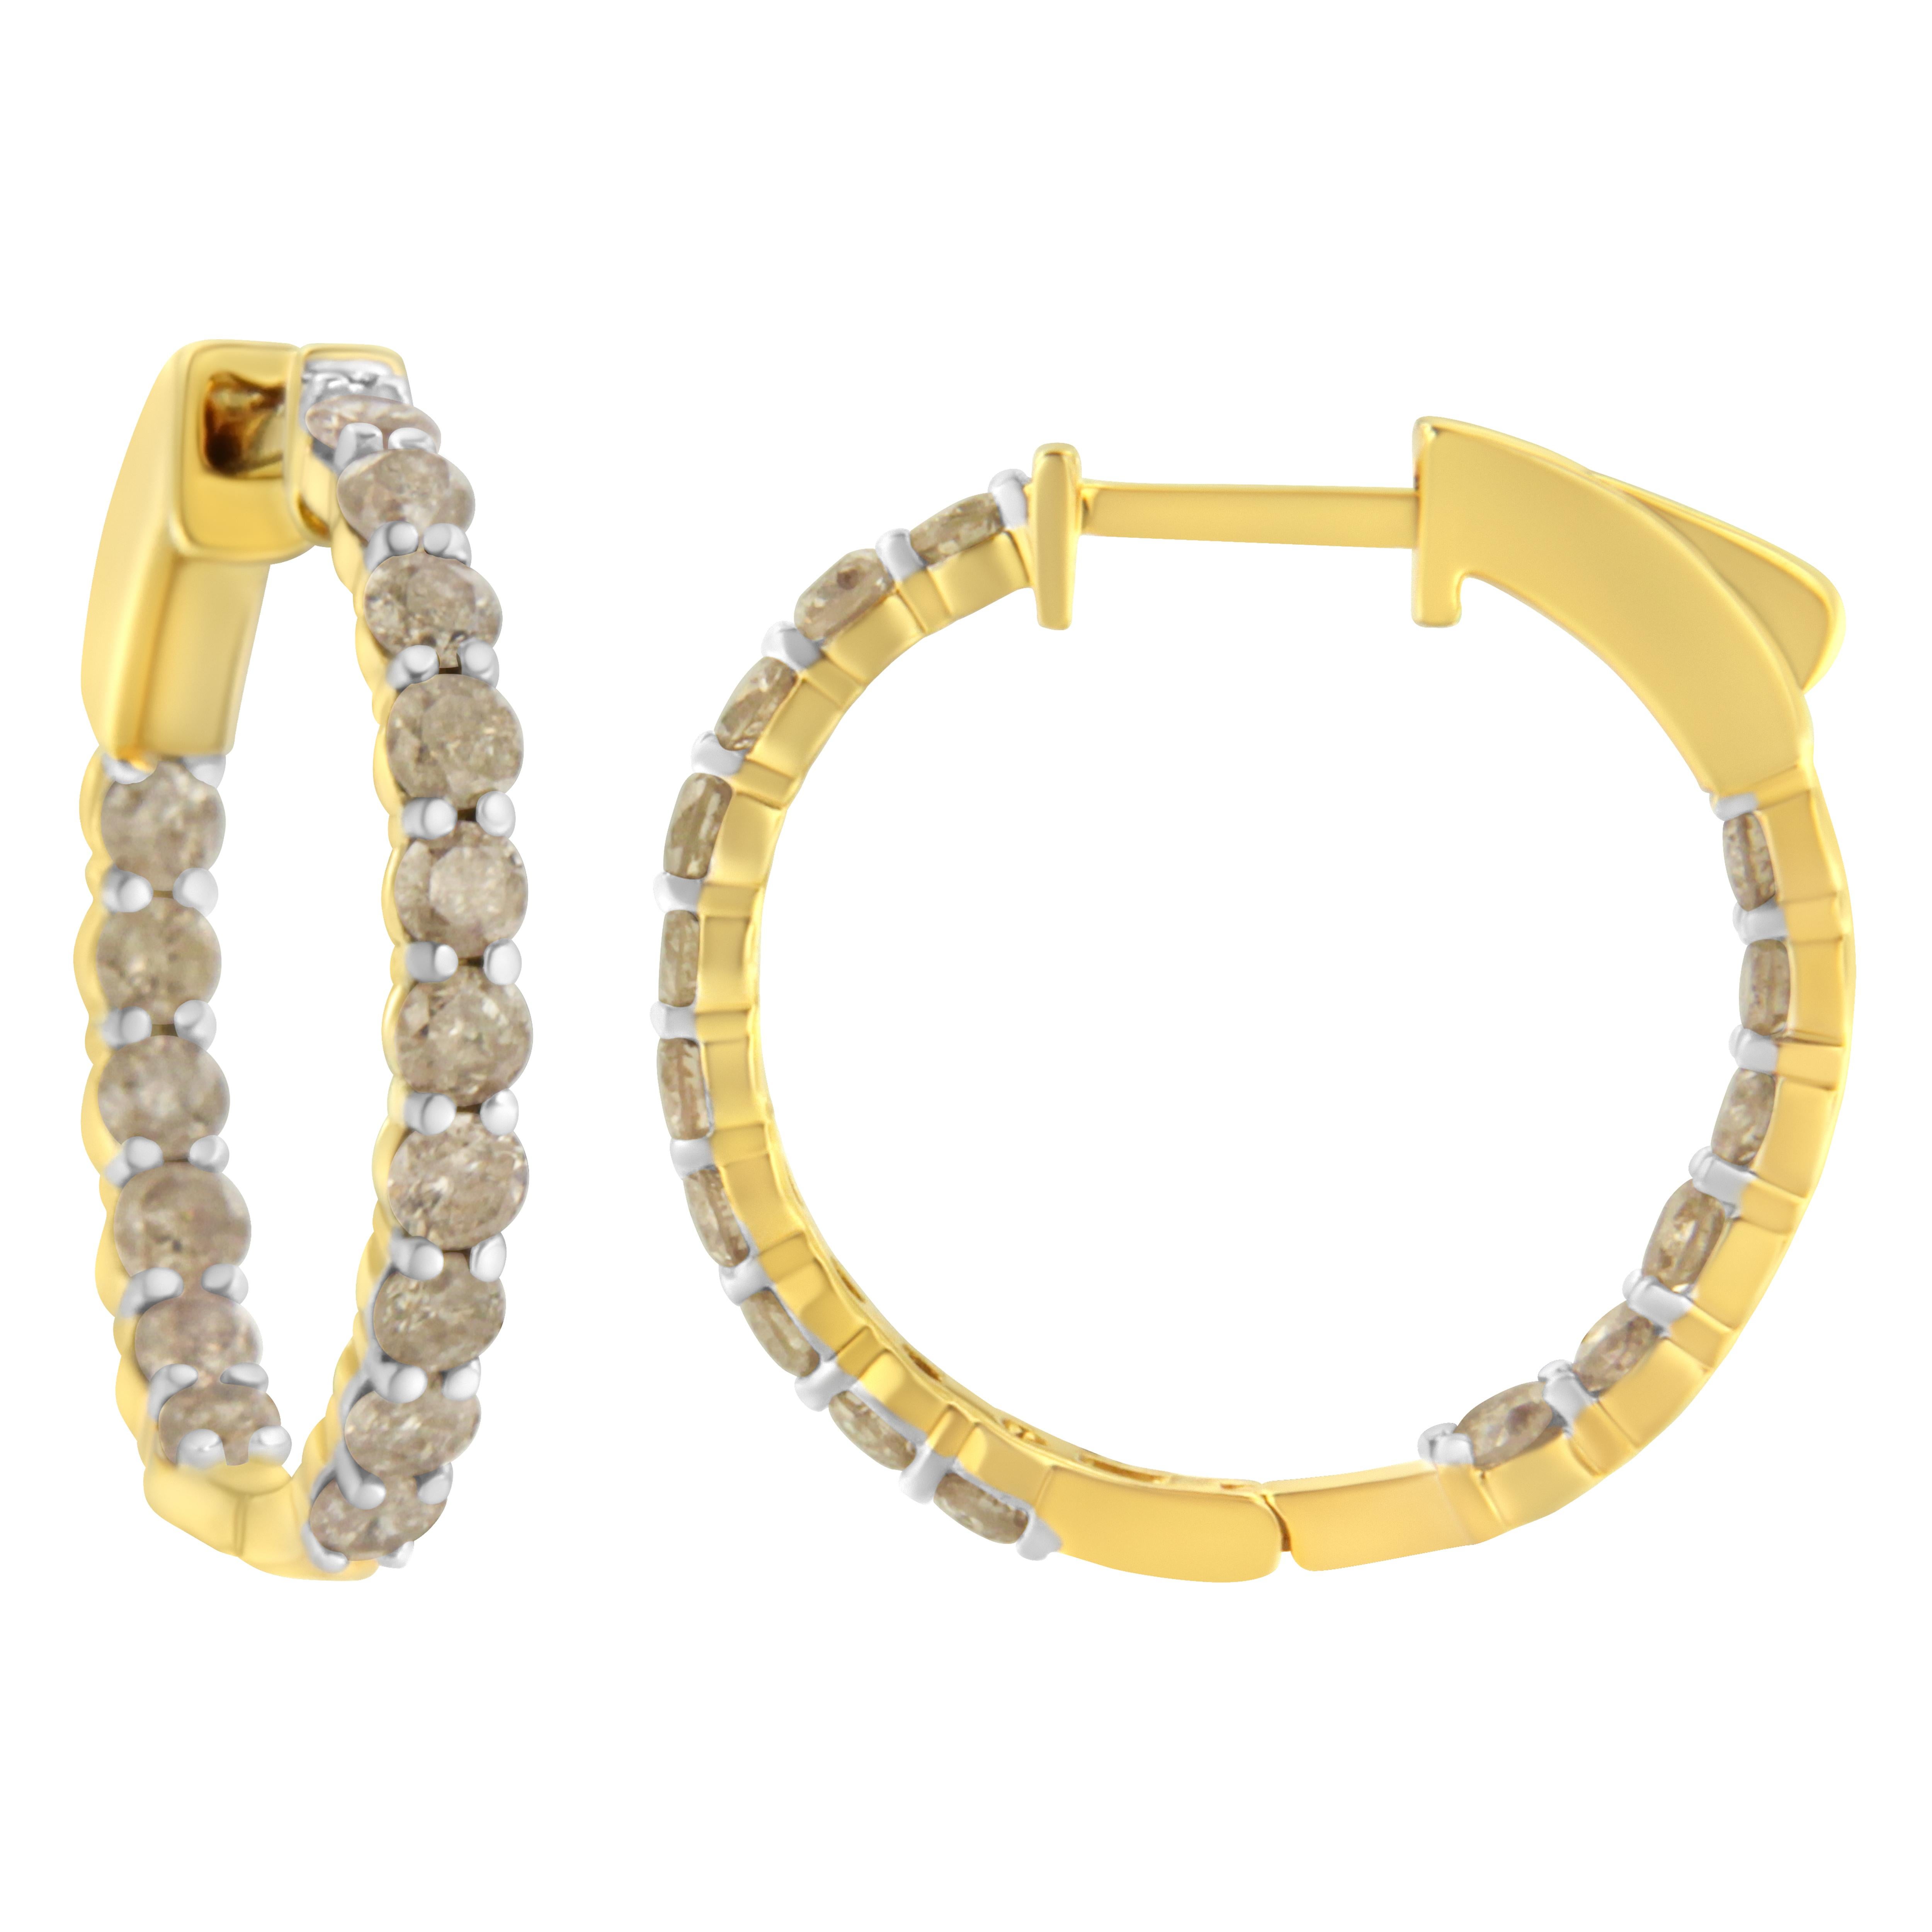 Trendy and chic diamond hoop earrings that are the perfect addition to any jewelry collection. Created in the finest 10k yellow gold plated sterling silver, this fabulous piece has round-cut diamonds on the outer and inner part of the earring. With